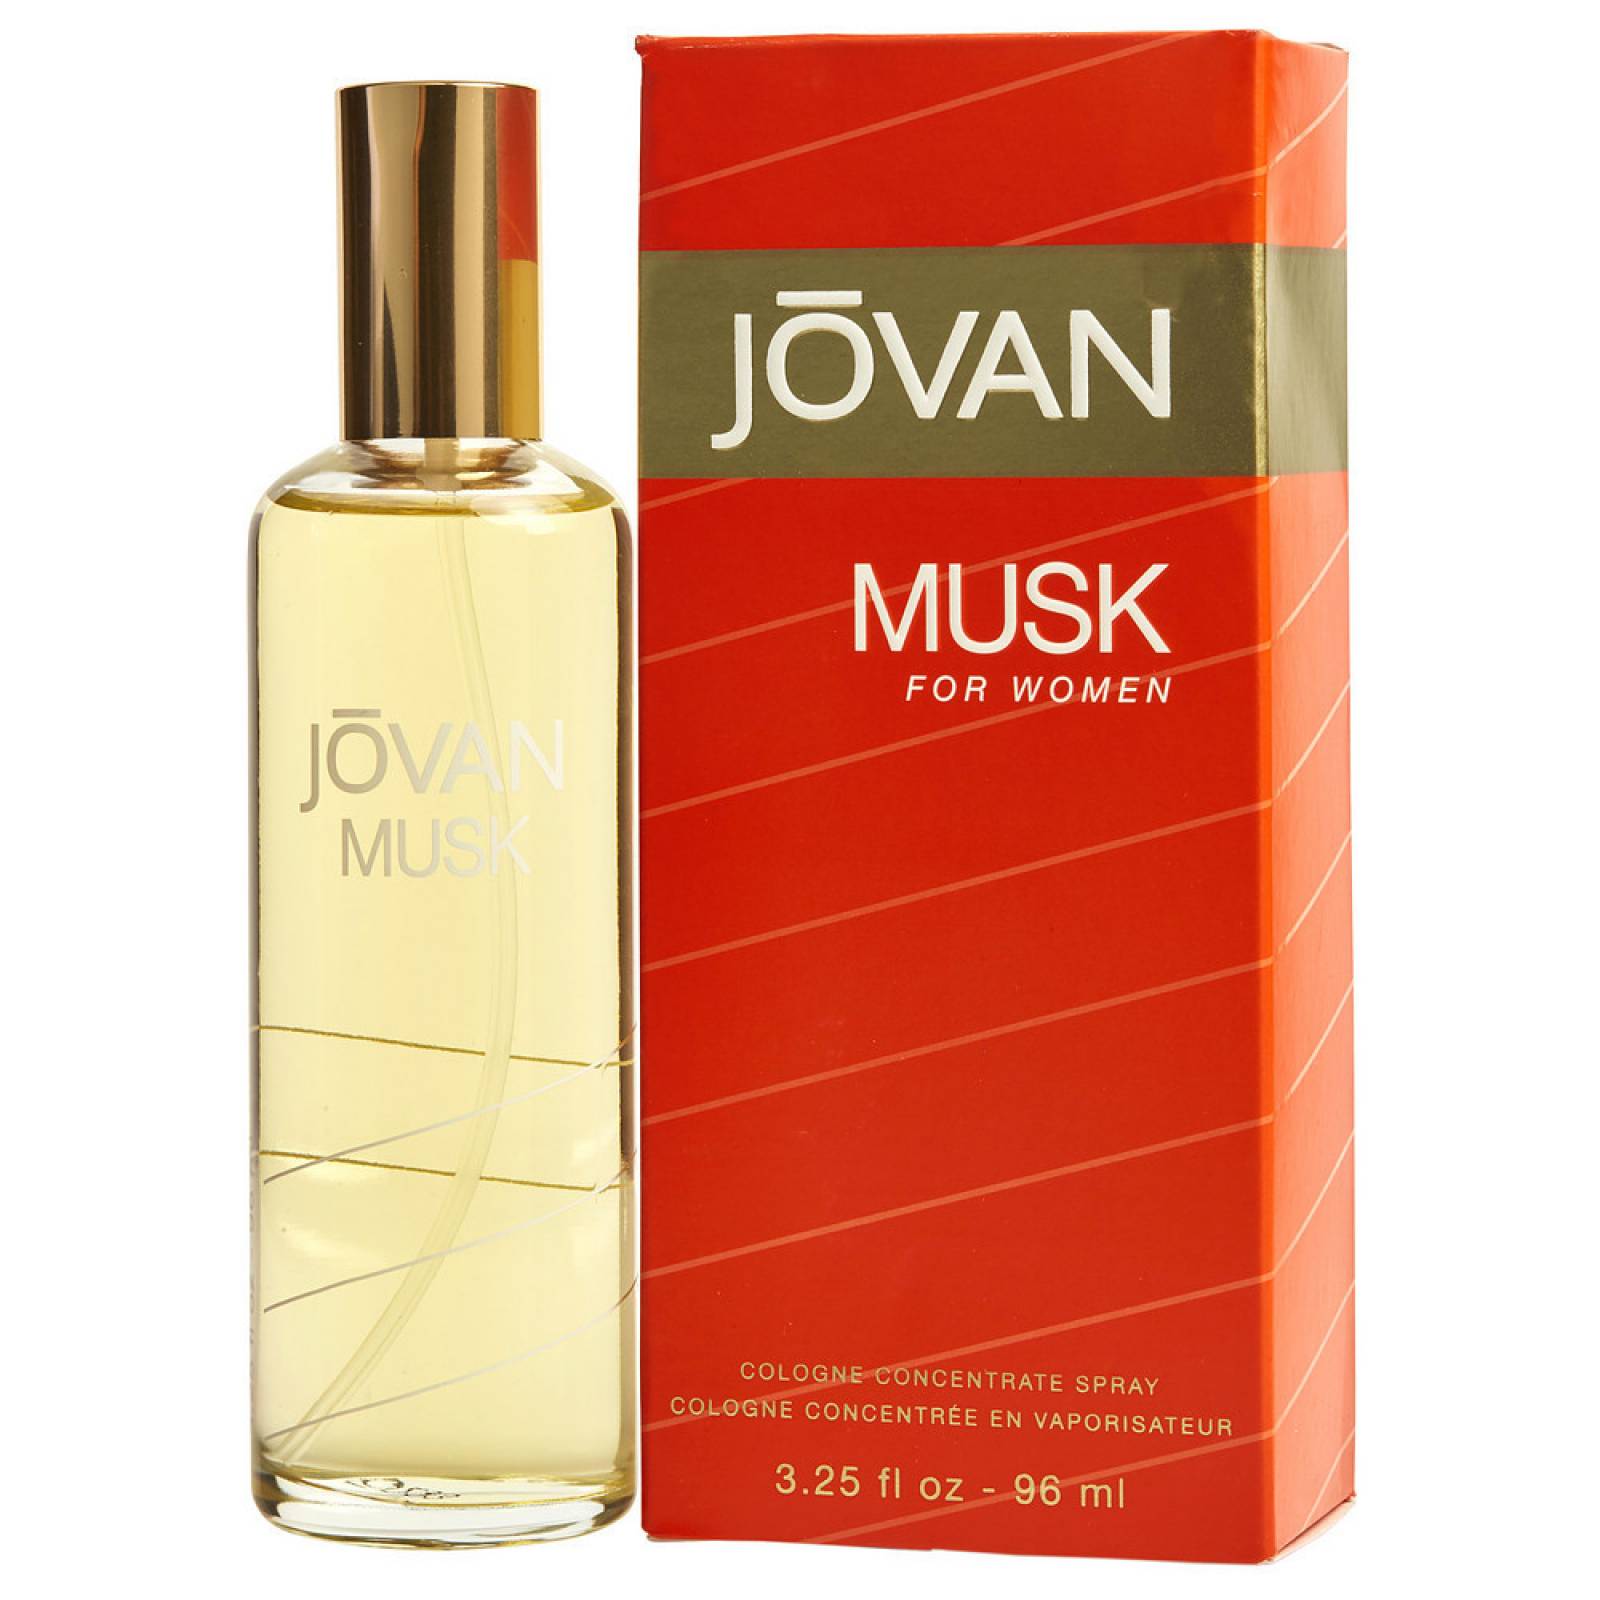 Jovan Musk For Women Cologne Concentrate 96 ml